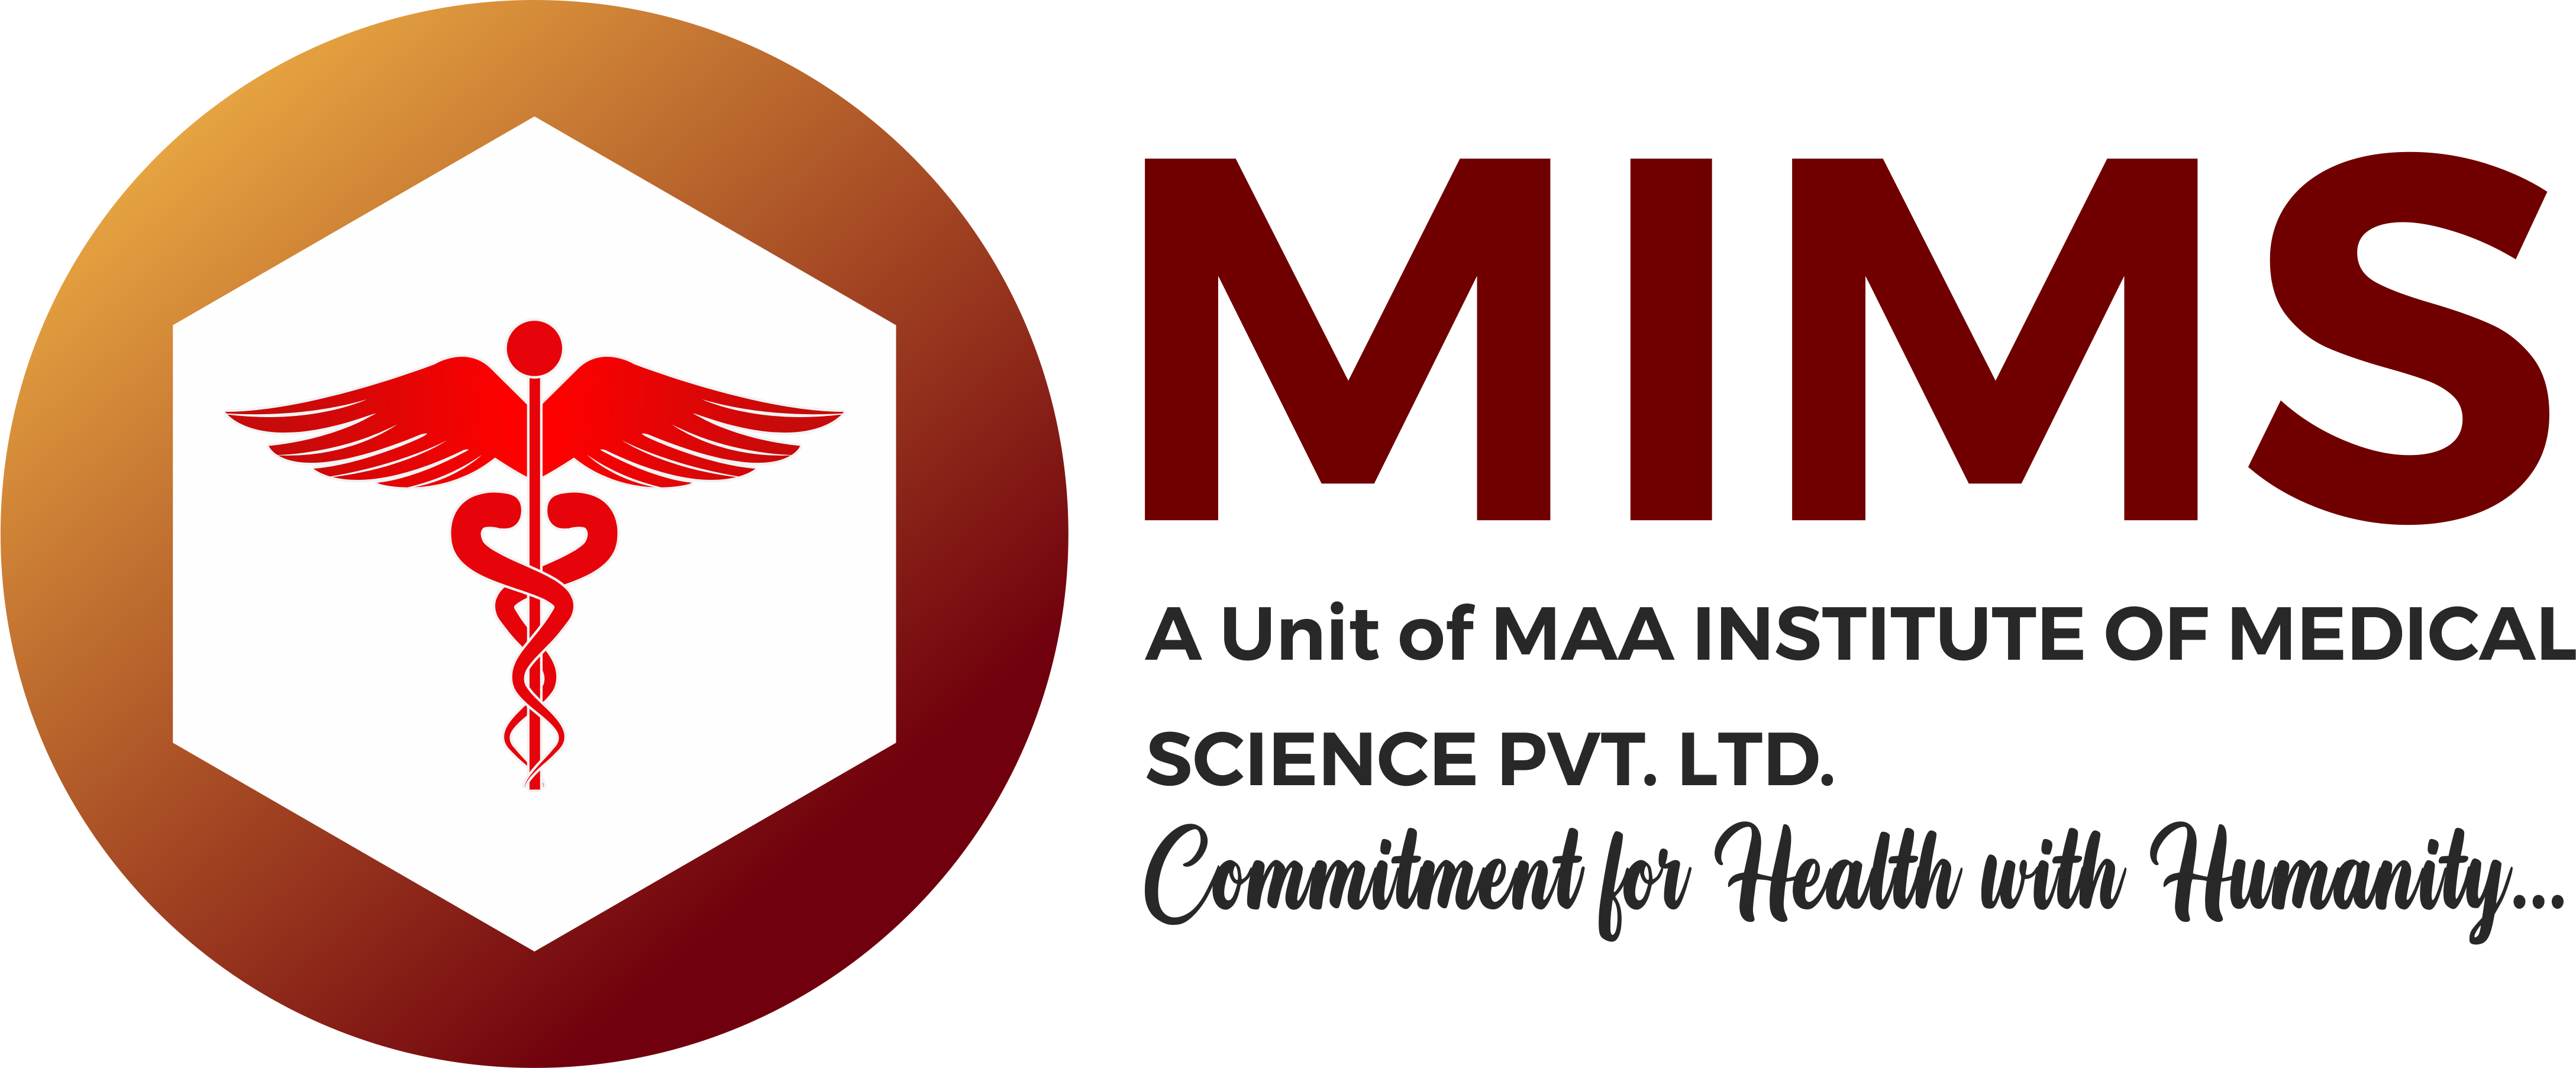 MIMS, MAA INSTITUTE OF MEDICAL SCIENCE PVT.LTD.Logo Image